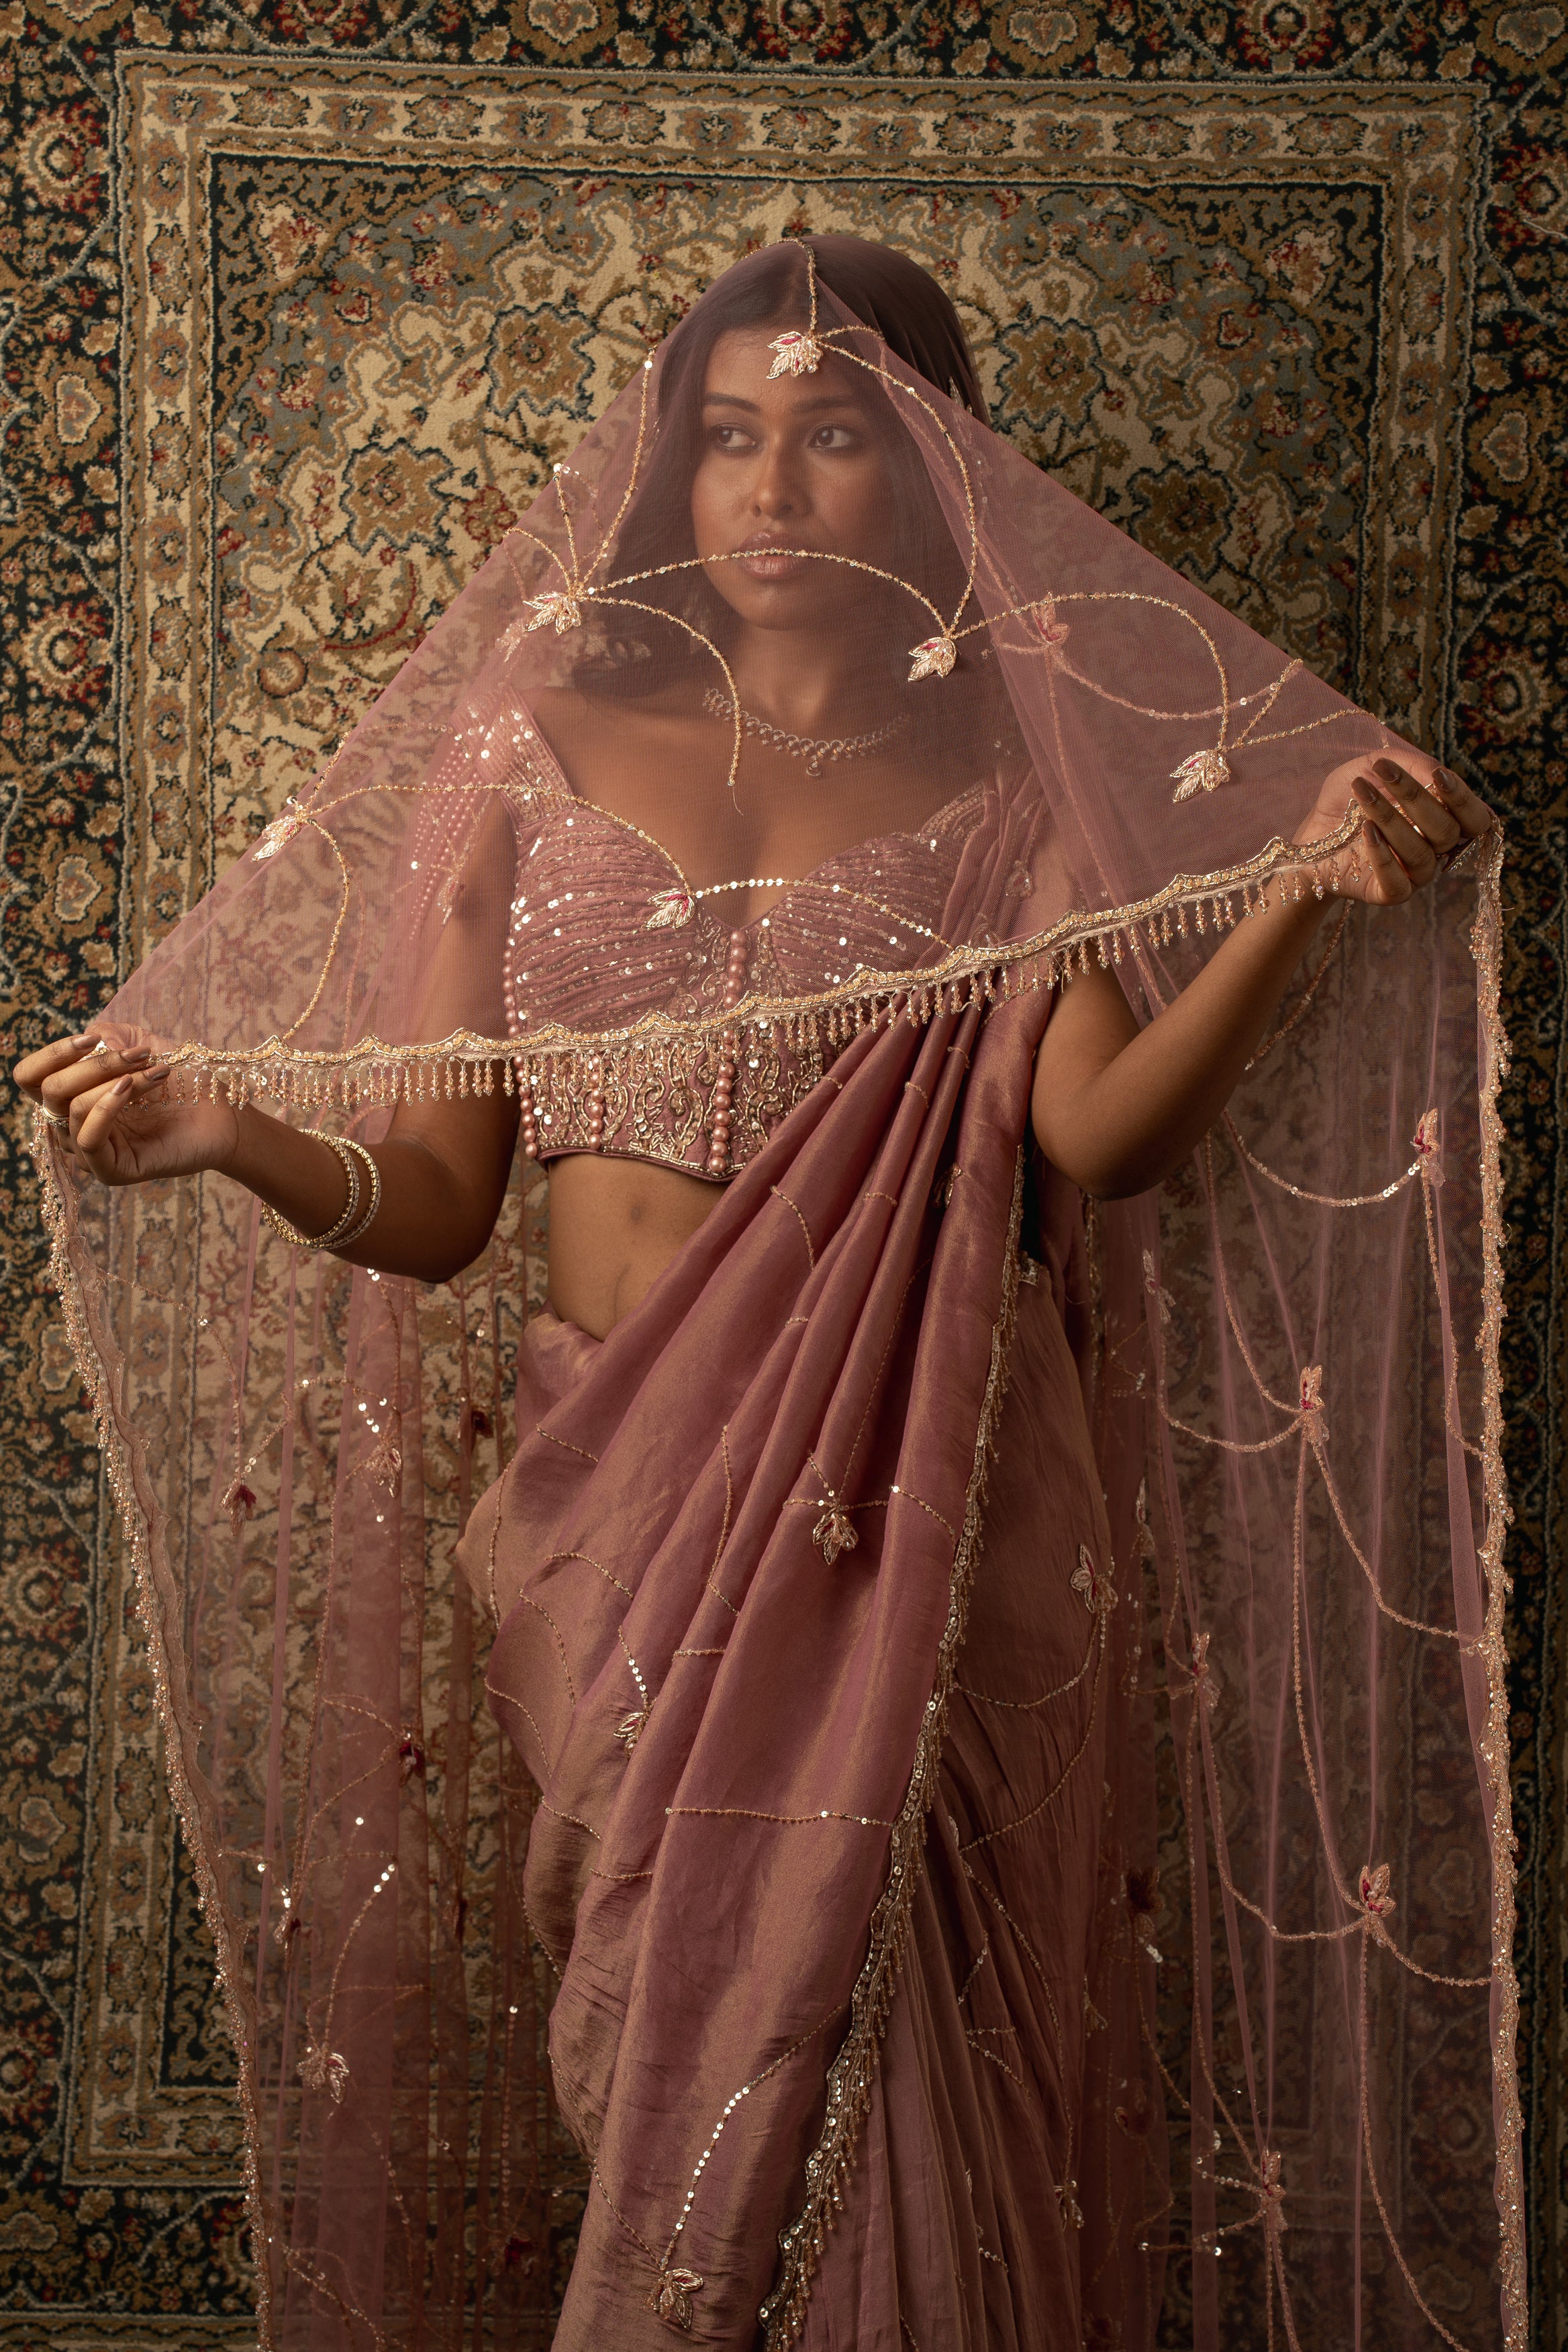 Elevate your elegance quotient: Step into the spotlight with this exquisite dusty rose saree ensemble, complete with velvet and net detailing.